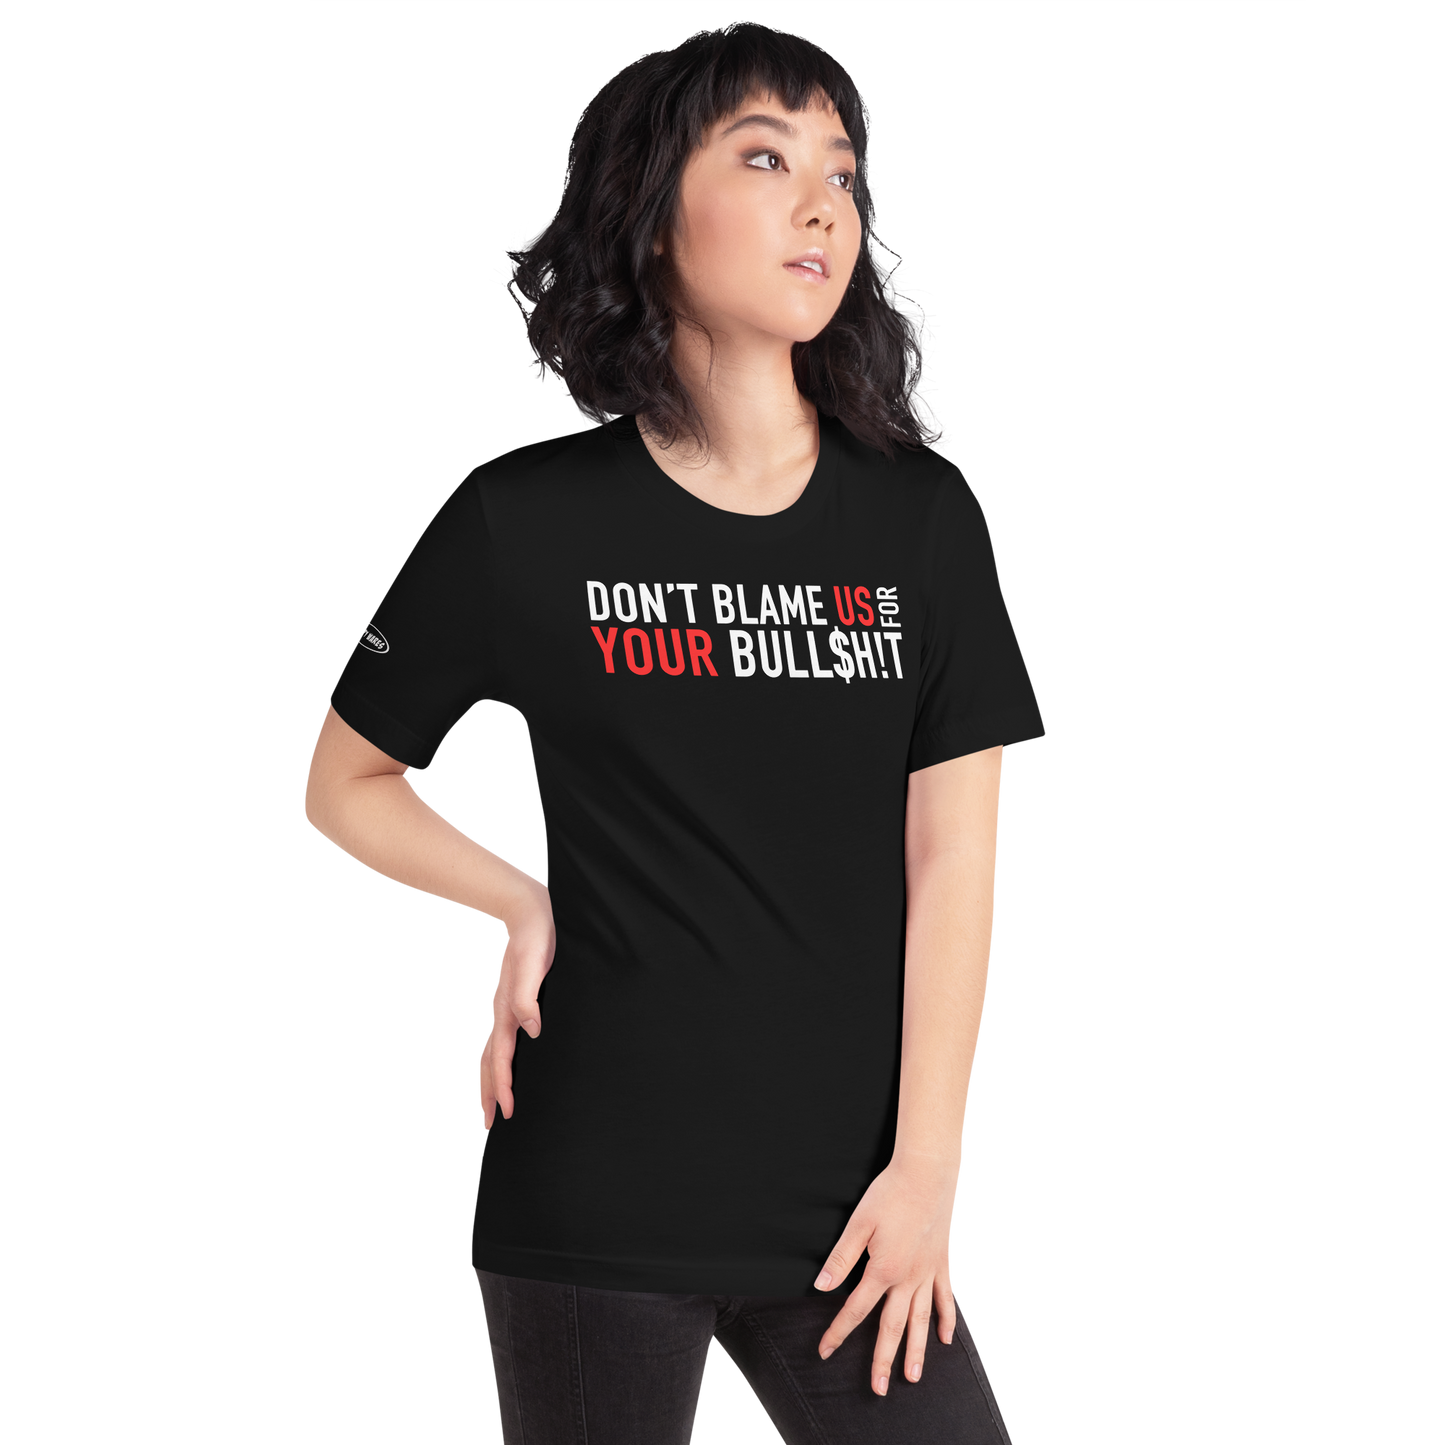 Don't Blame Us for Your Bull$h!t - Funny T-Shirt